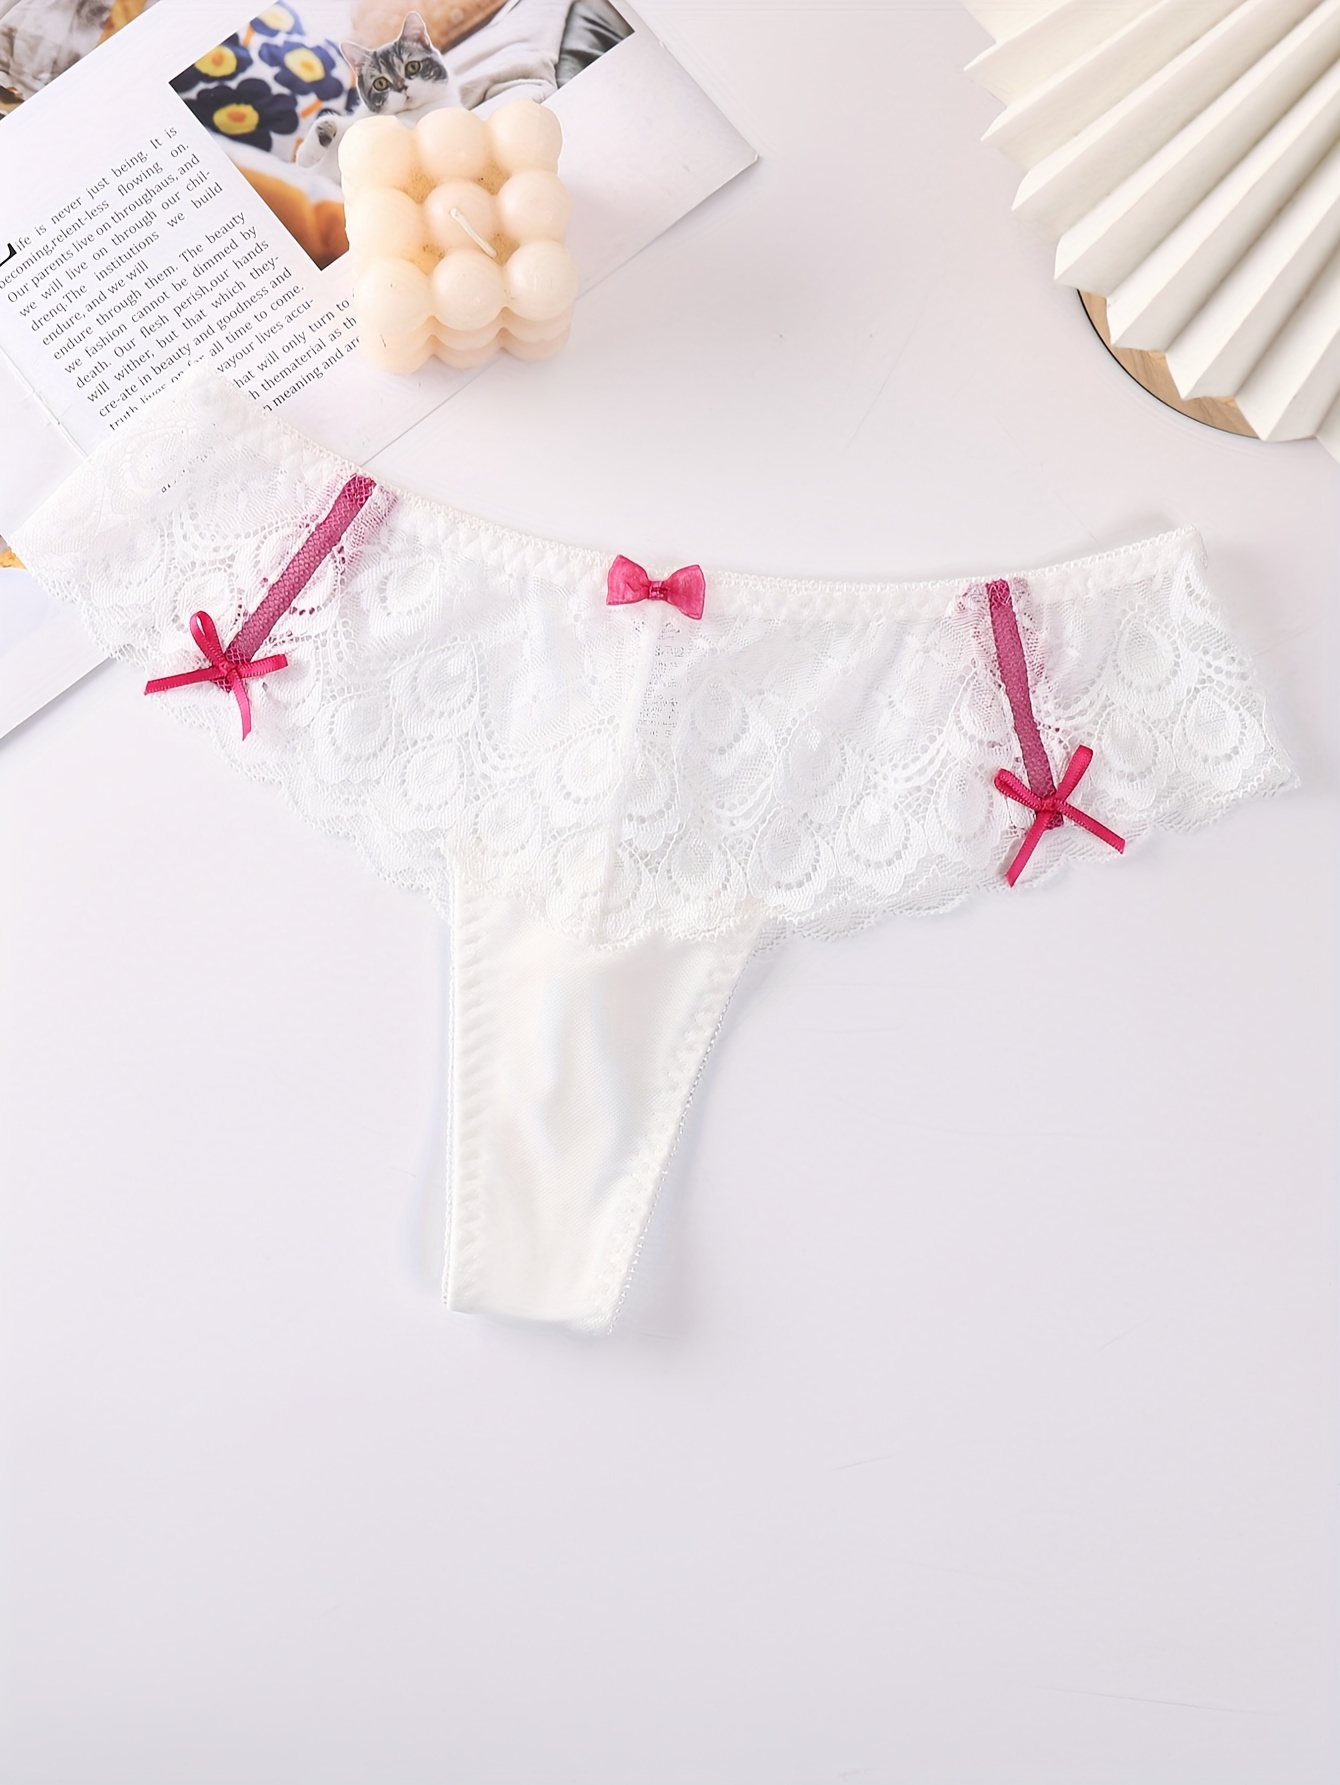 Contrast Lace Thongs Soft Comfy Stretchy Intimates Panties - Temu